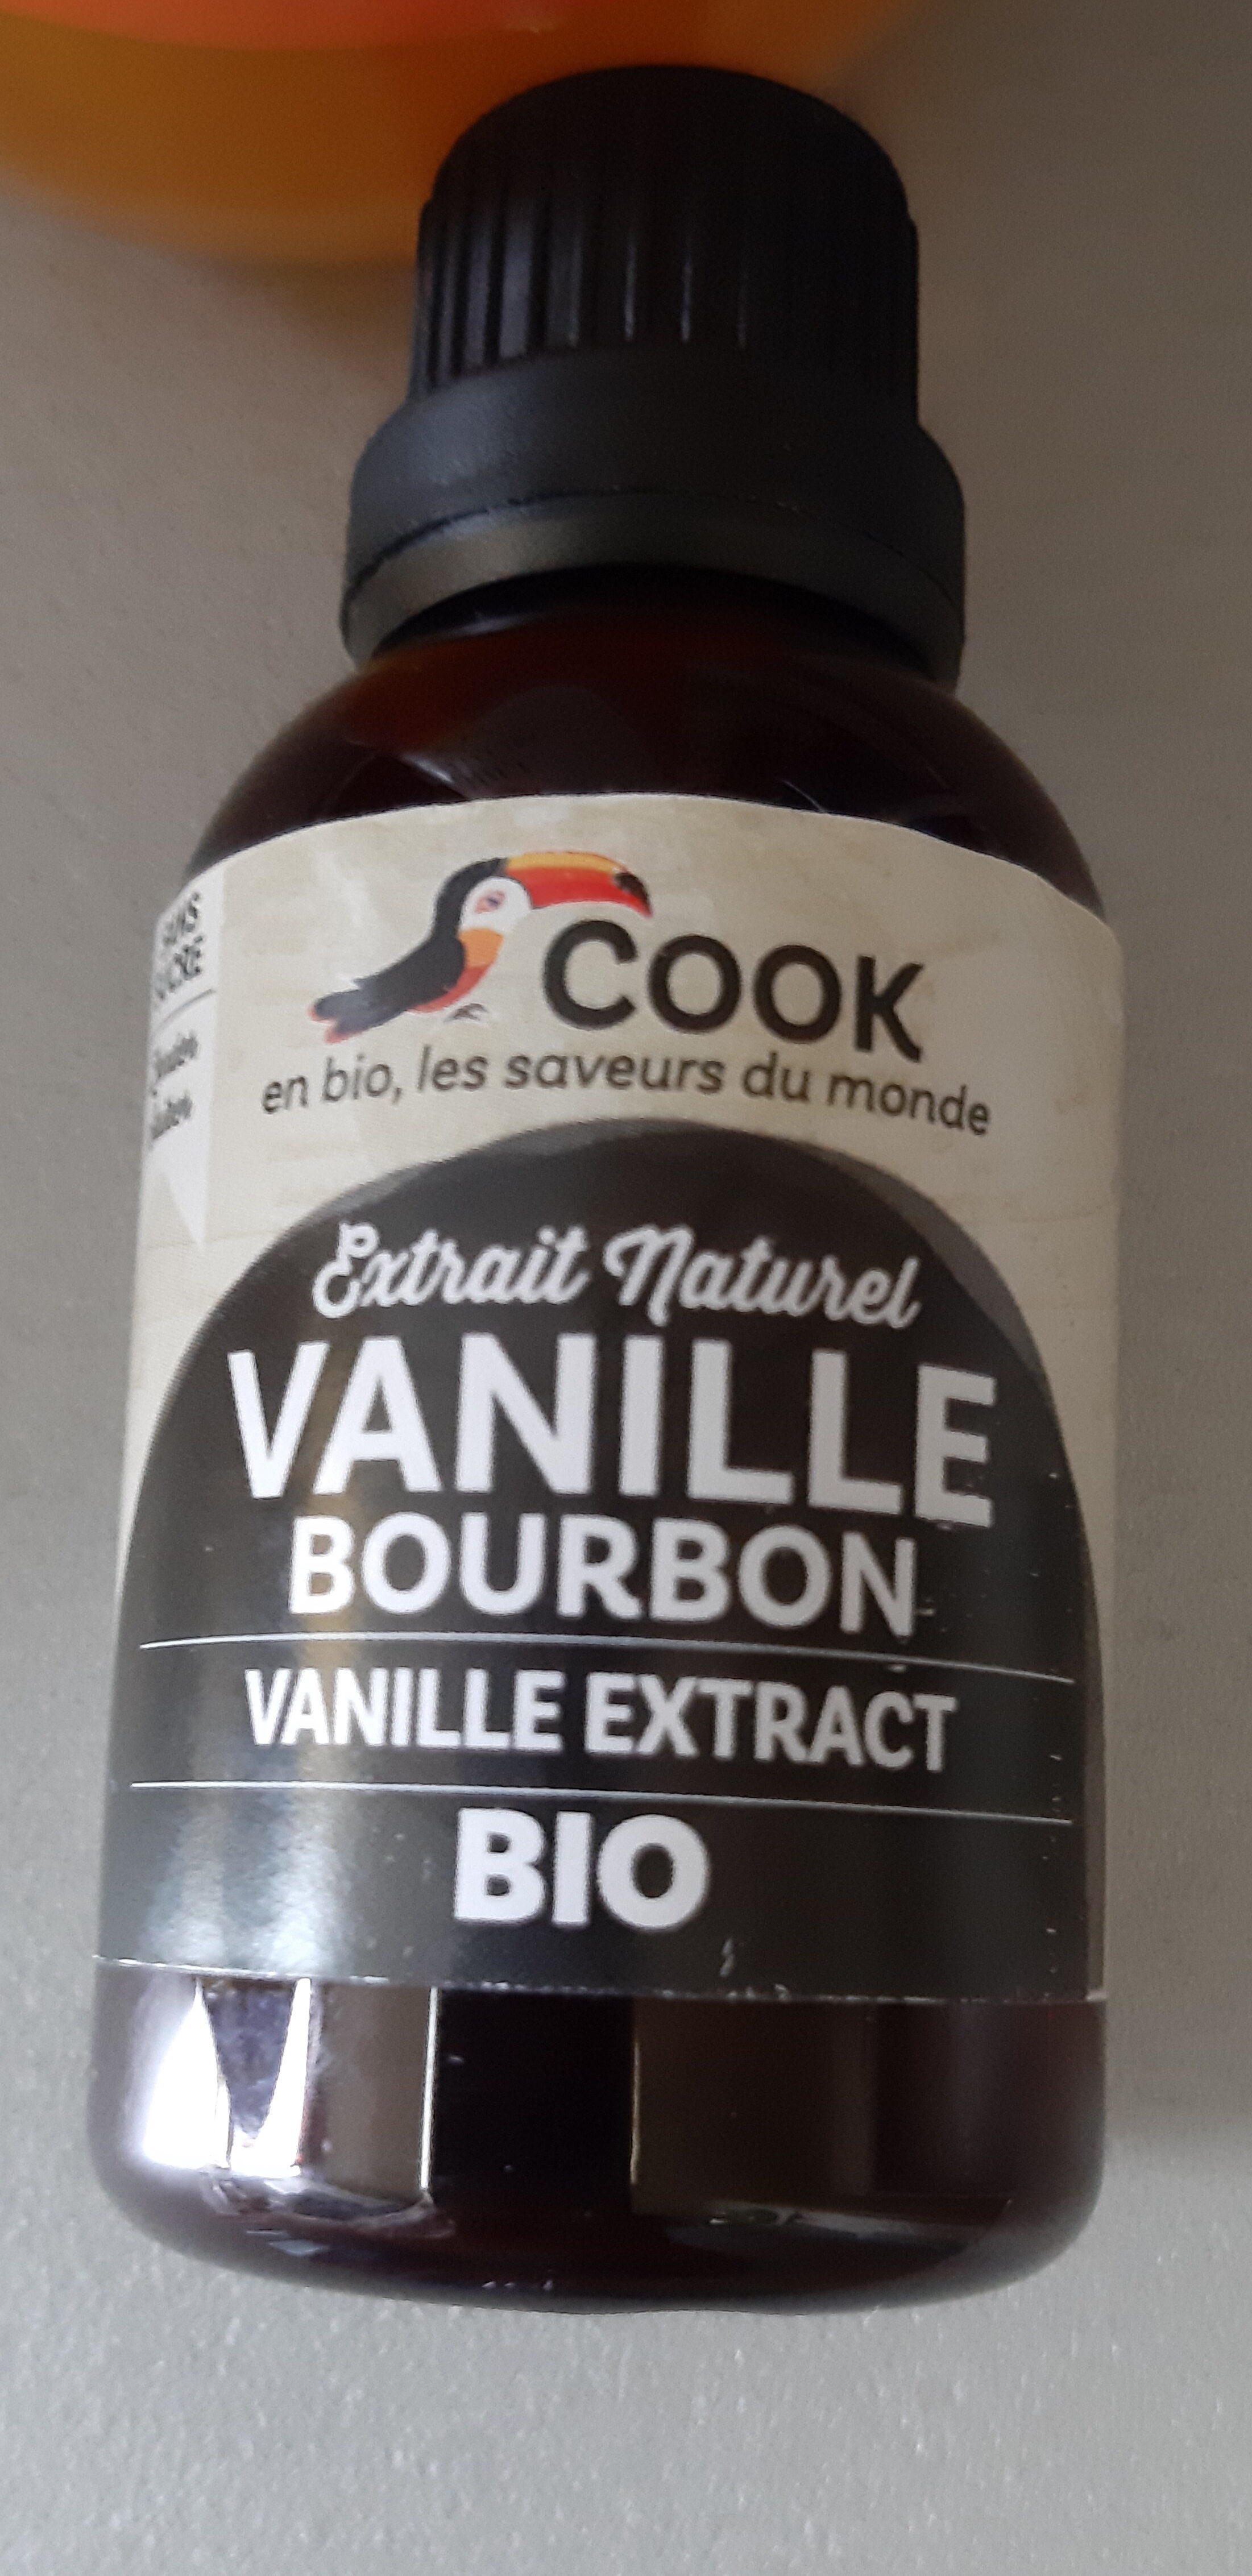 Vanille bourbon extract - Product - fr